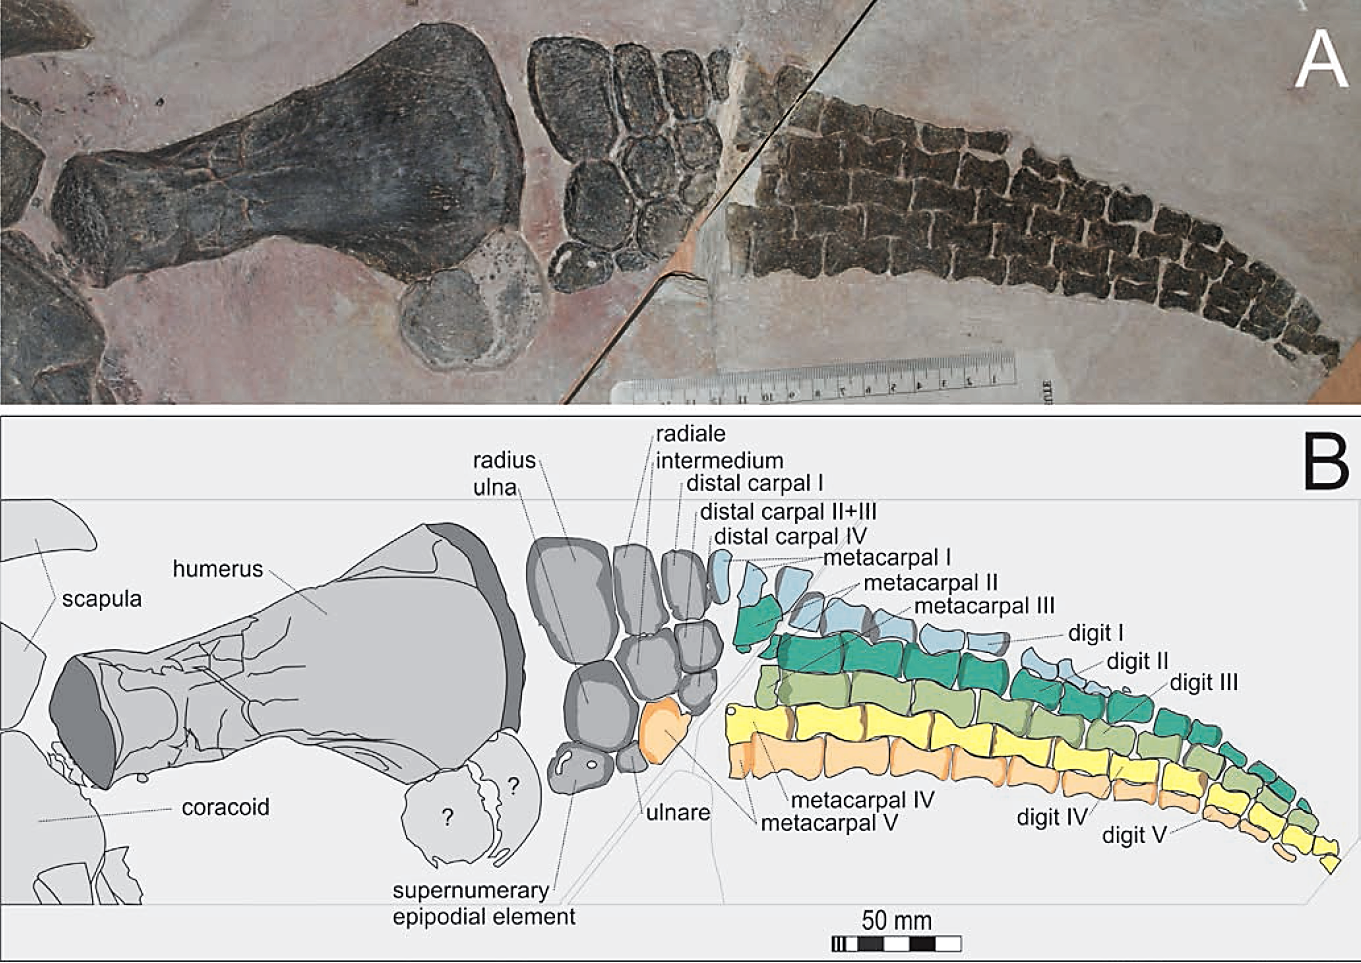 A new polycotylid plesiosaur with extensive soft tissue